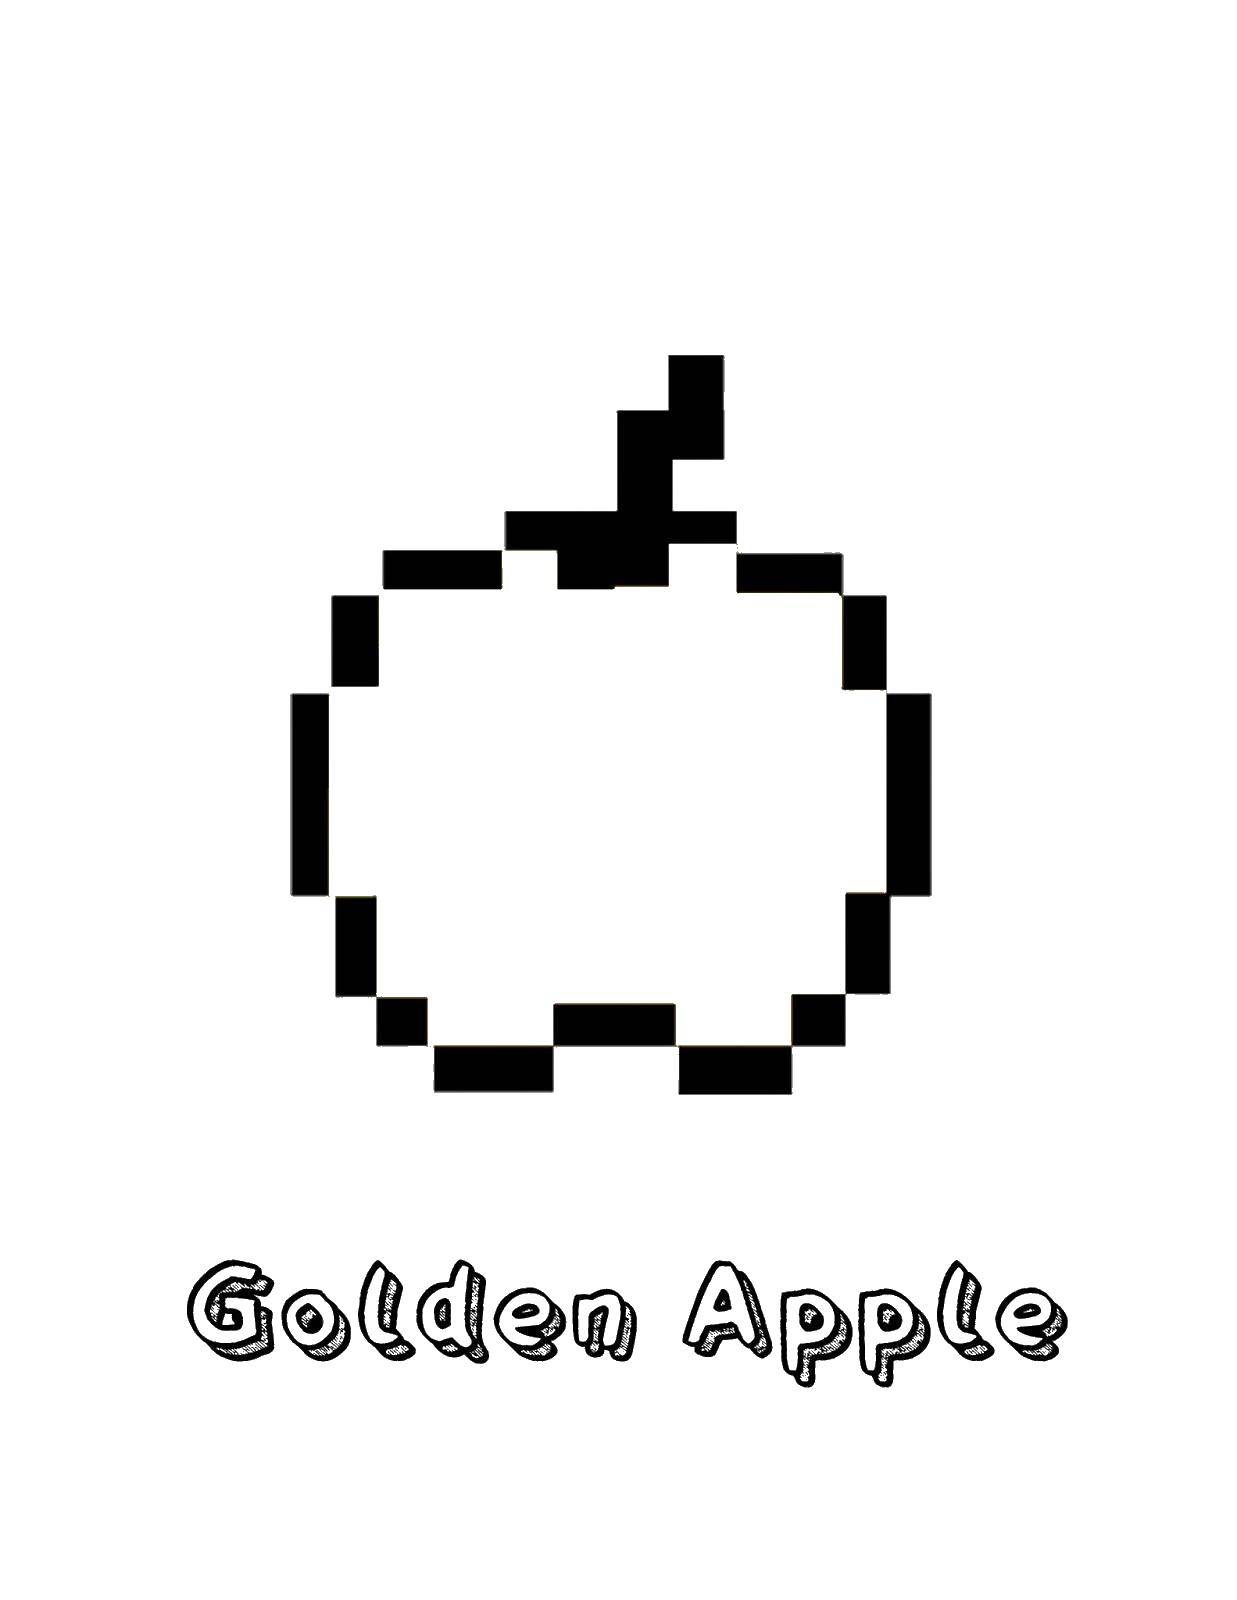 Coloring The Apple mincraft. Category minecraft. Tags:  Games, Minecraft.